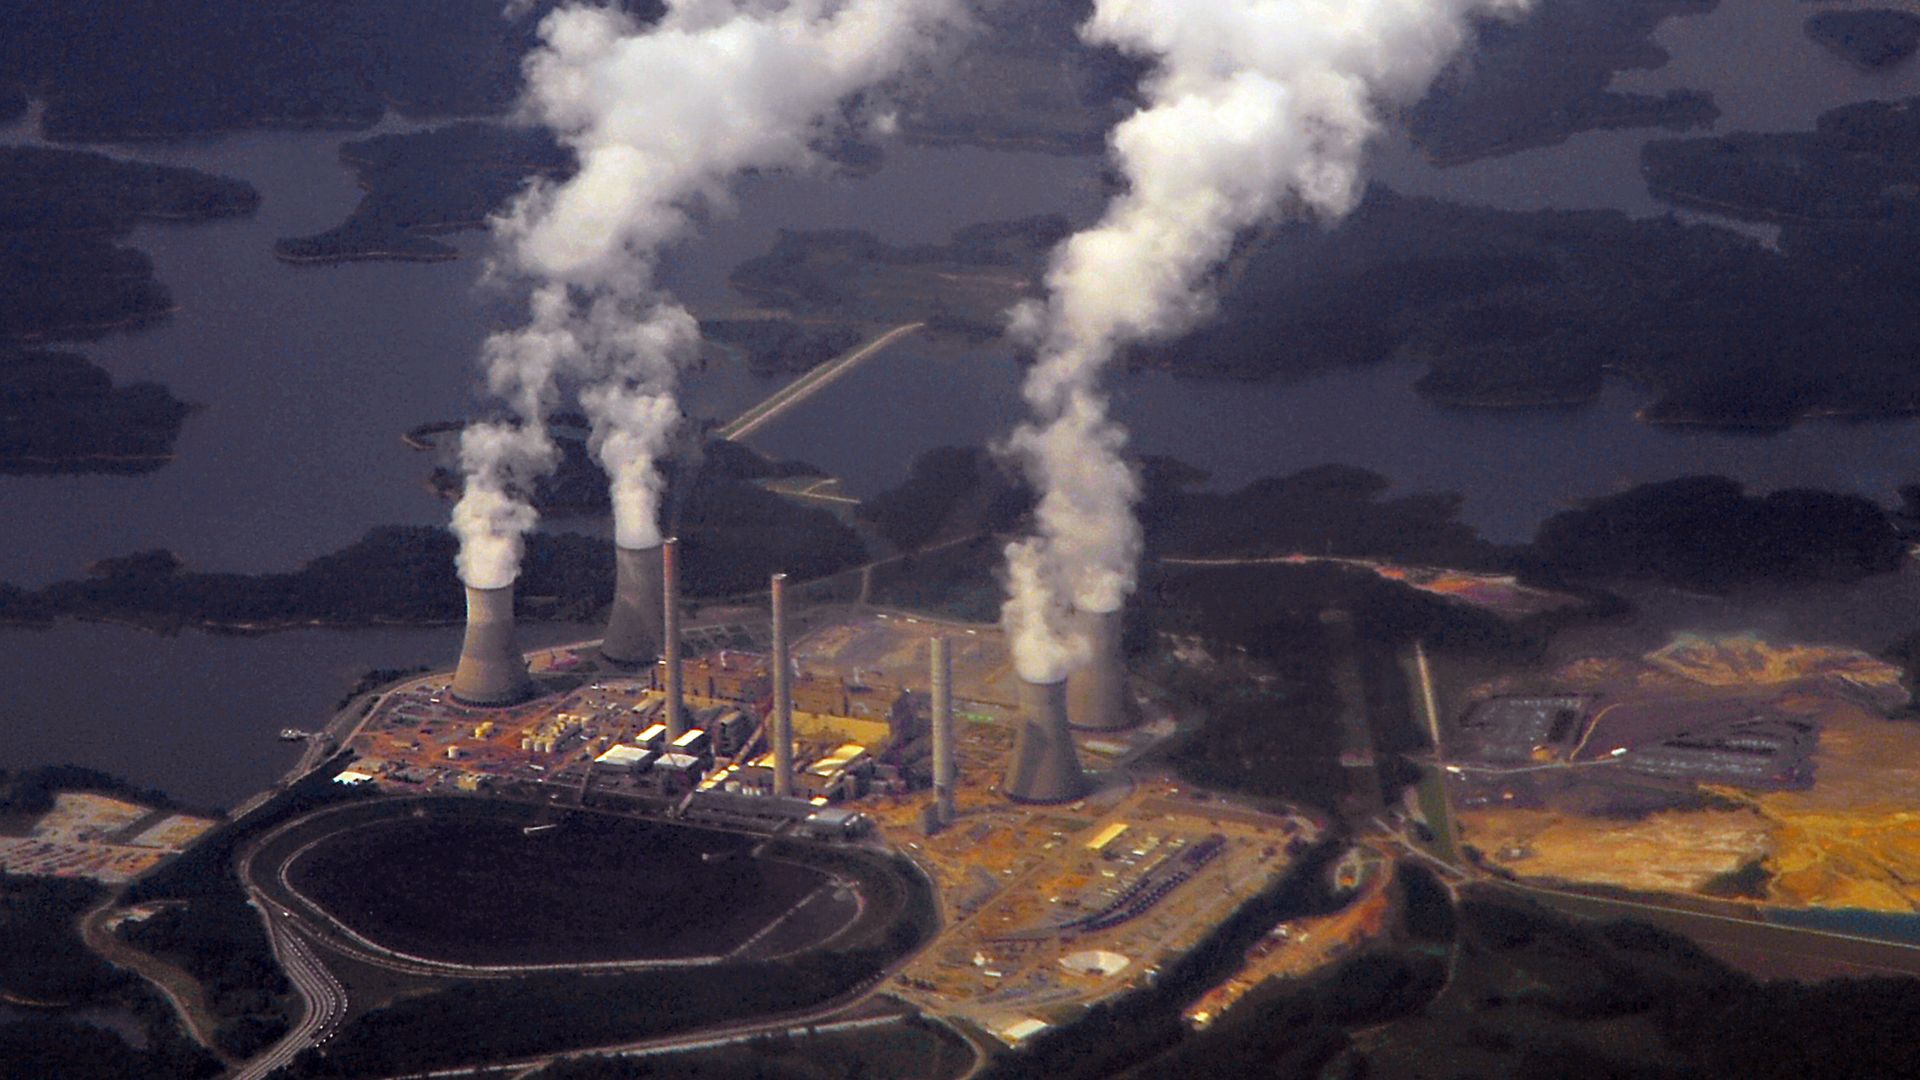 An aerial stock photograph of Plant Bowen, a coal-fired power plant near Cartersville, and a nearby body of water